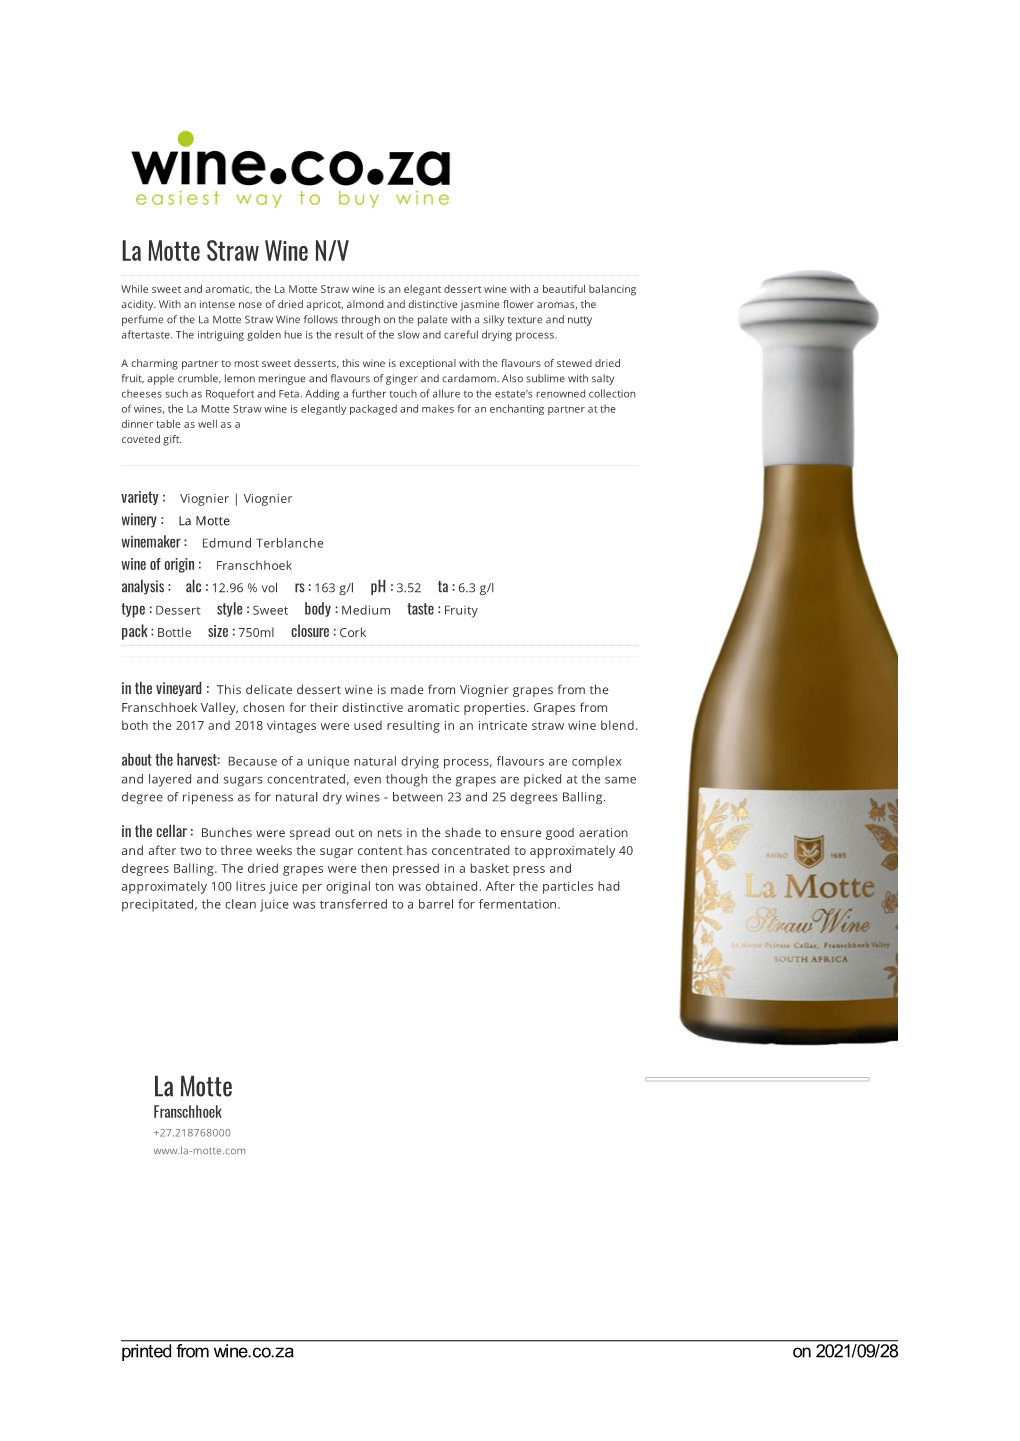 La Motte Straw Wine N/V While Sweet and Aromatic, the La Motte Straw Wine Is an Elegant Dessert Wine with a Beautiful Balancing Acidity